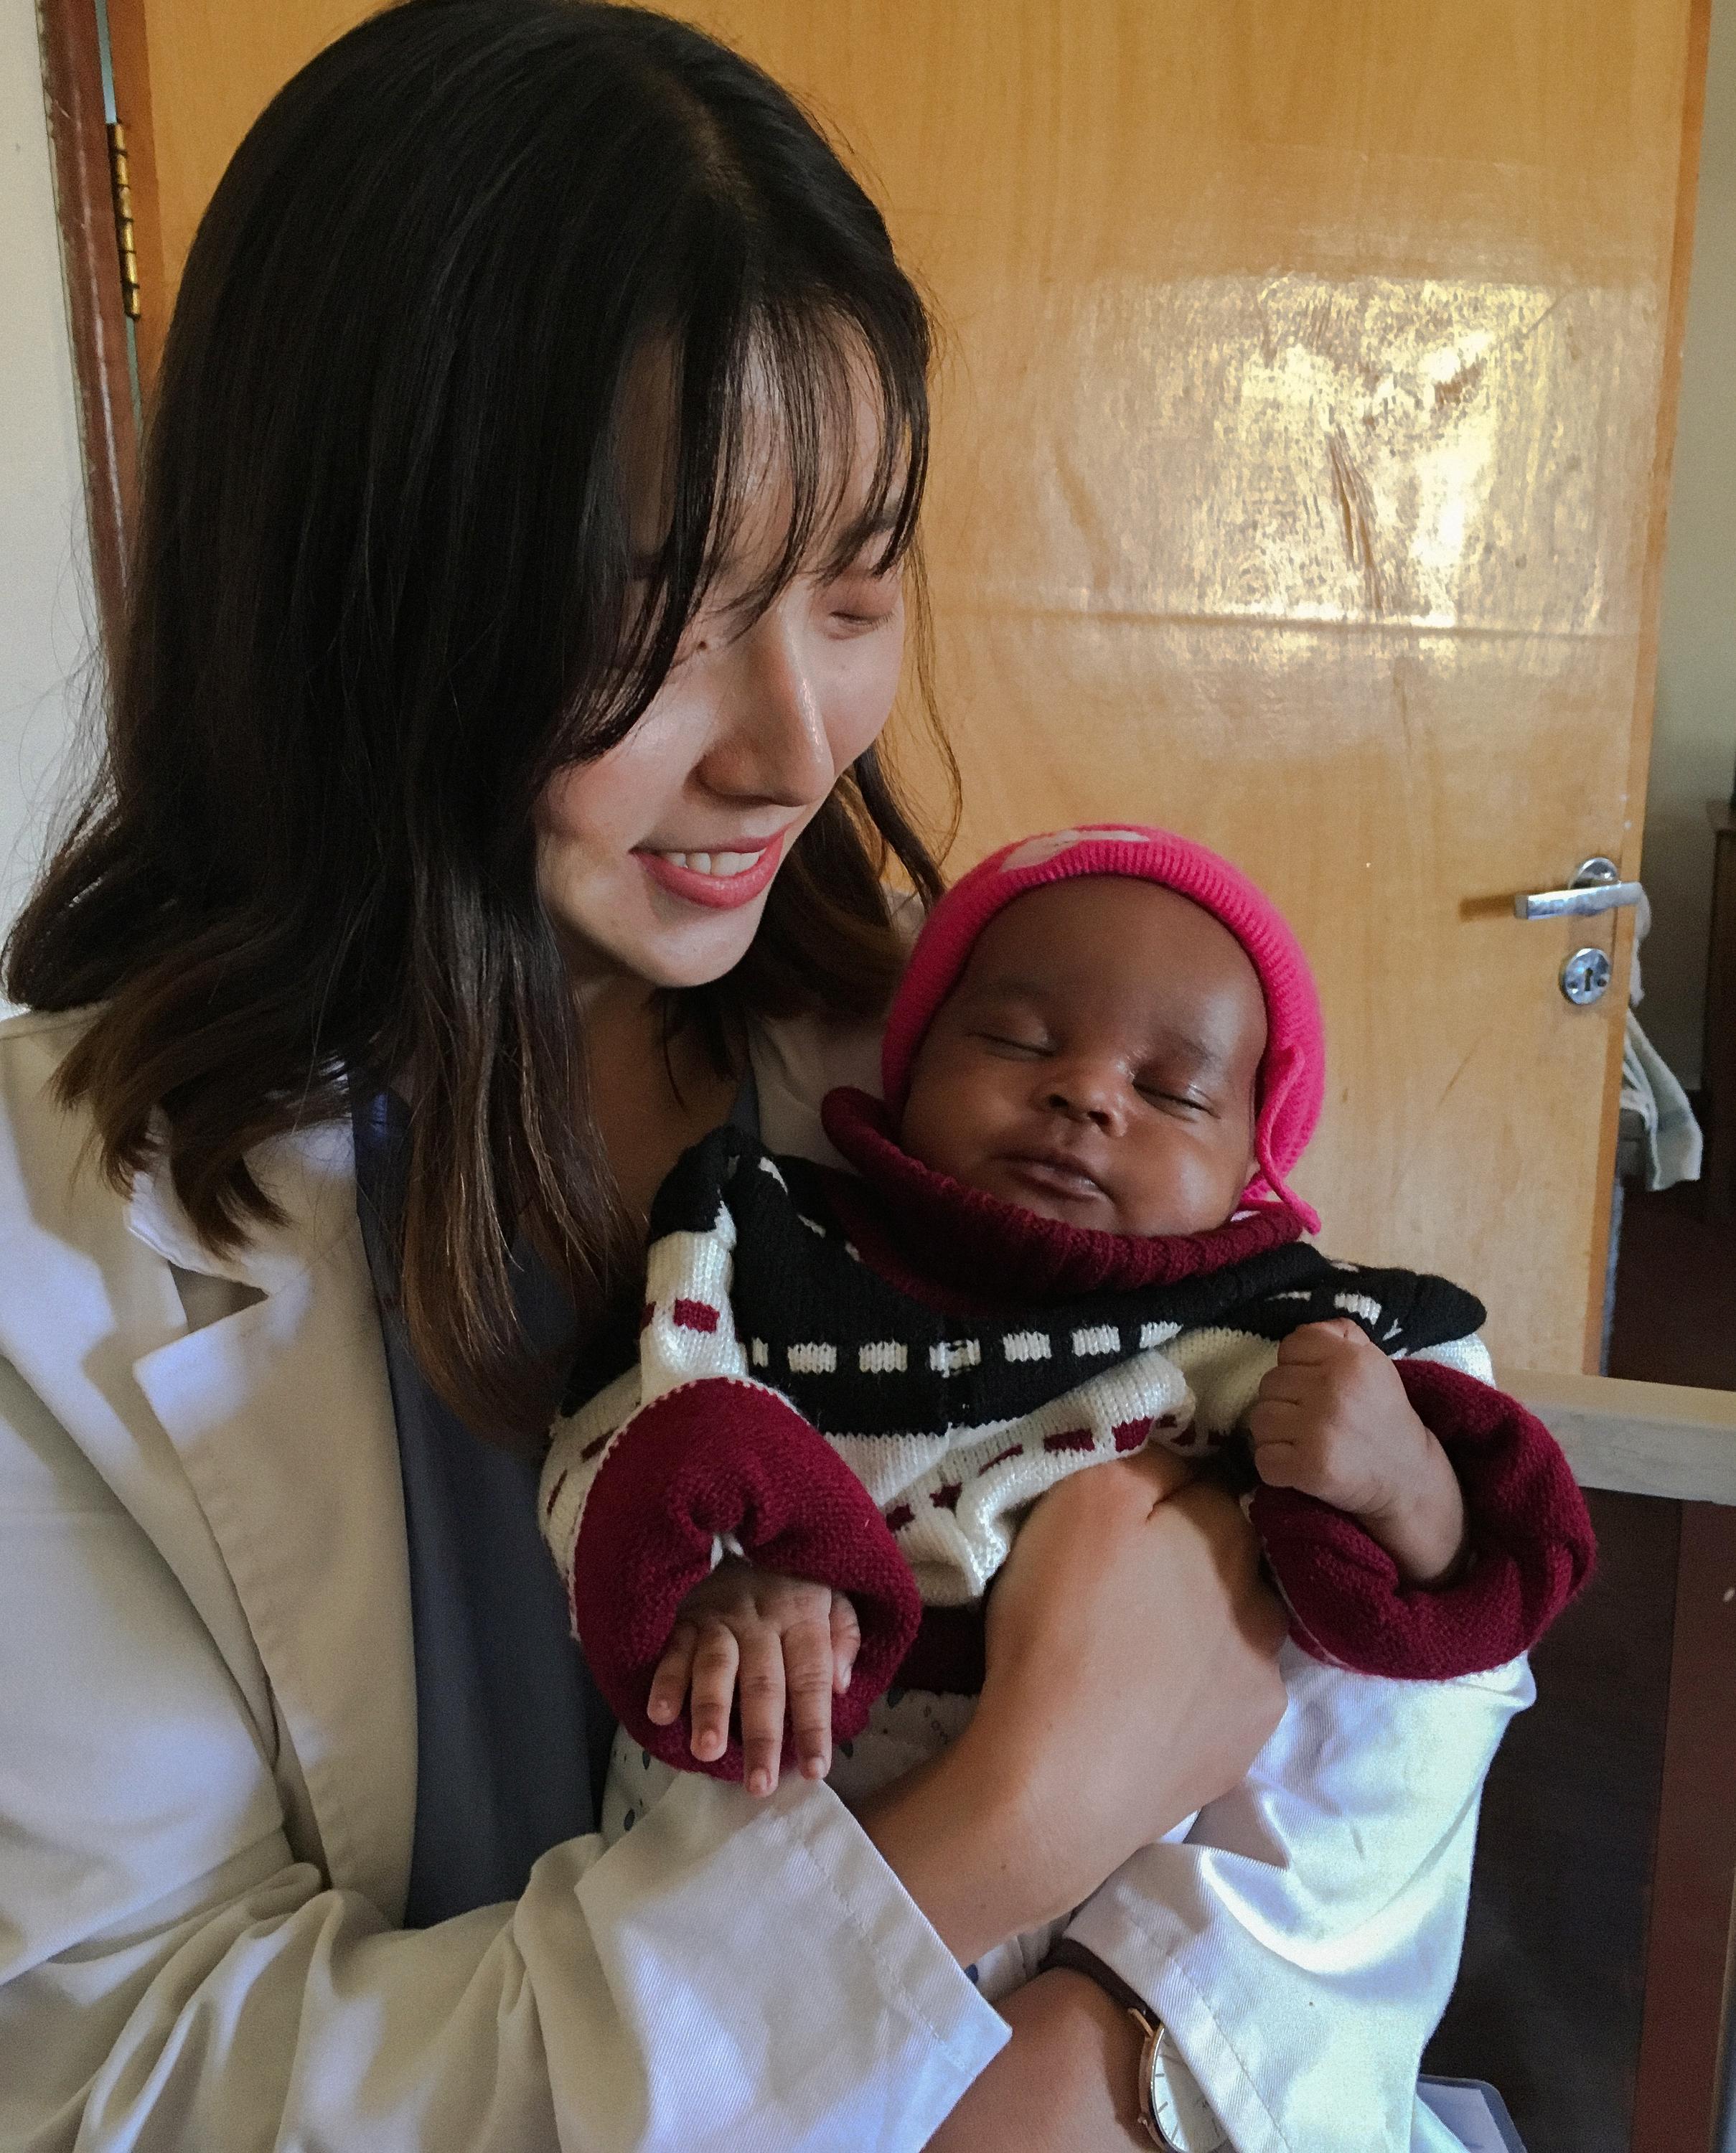 Jung In Kim holding a infant patient in Tanzanian hospital